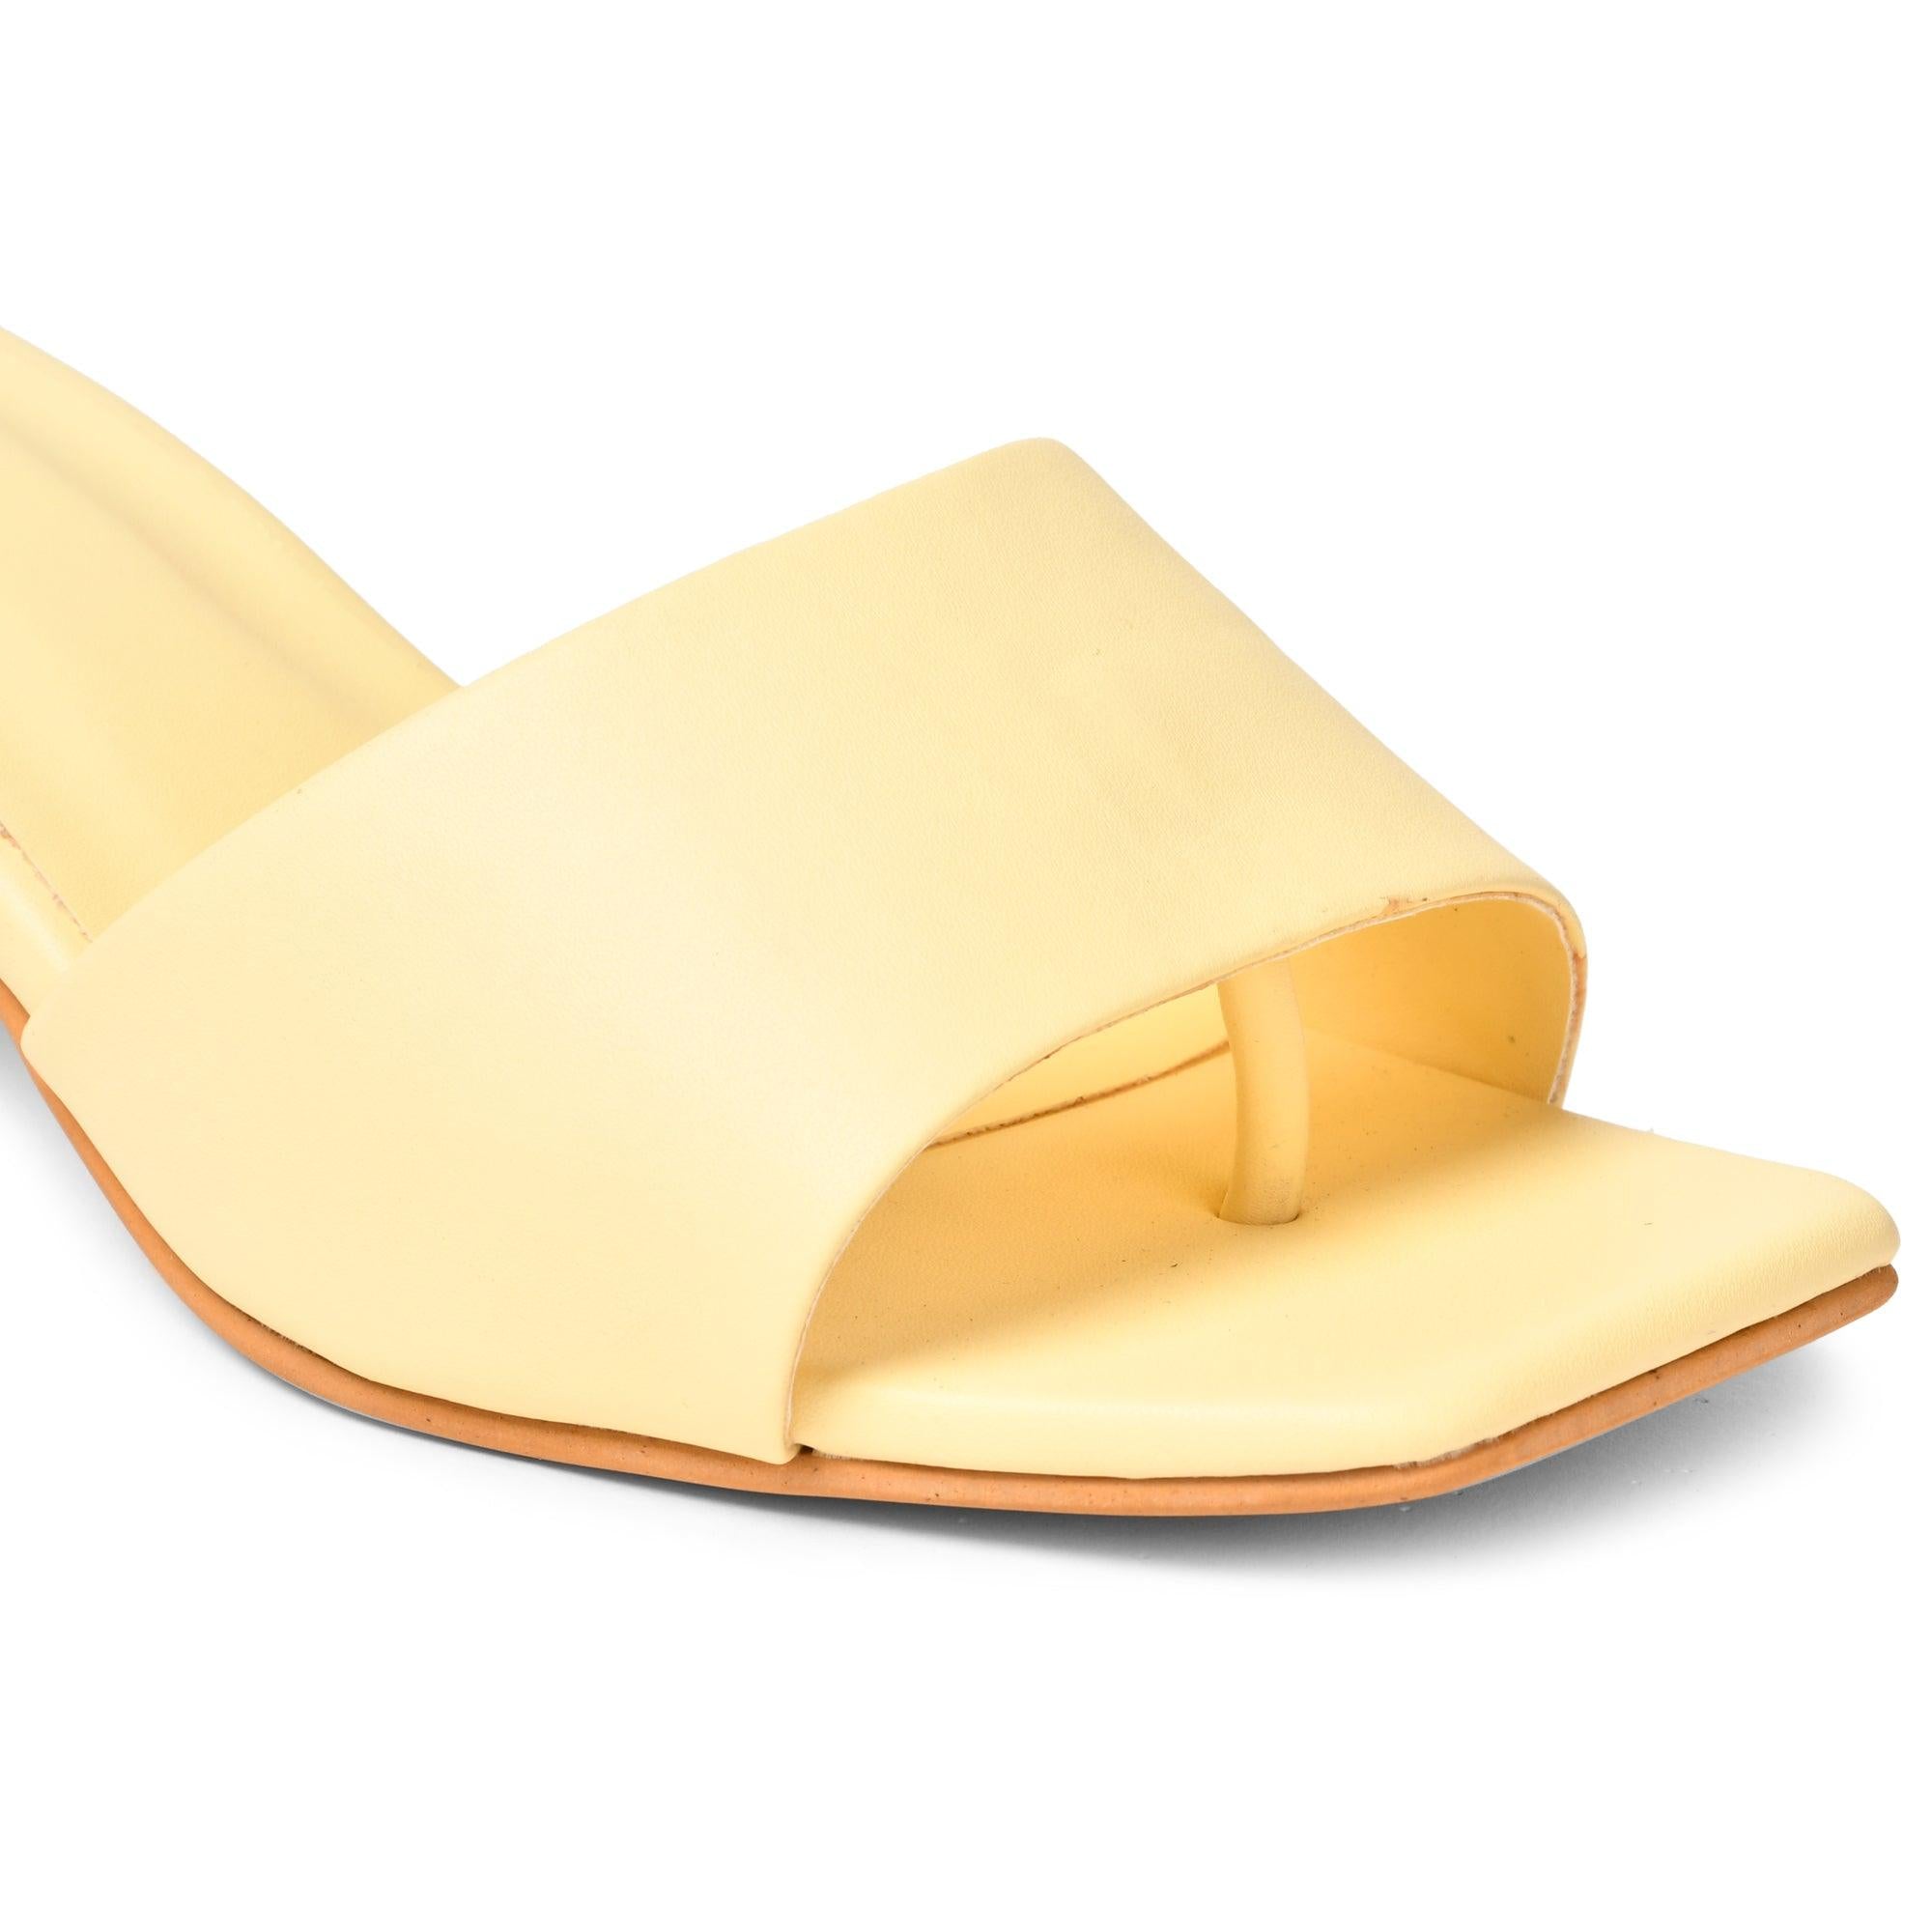 GNIST Chunky Yellow Heels - Gnist Fashion